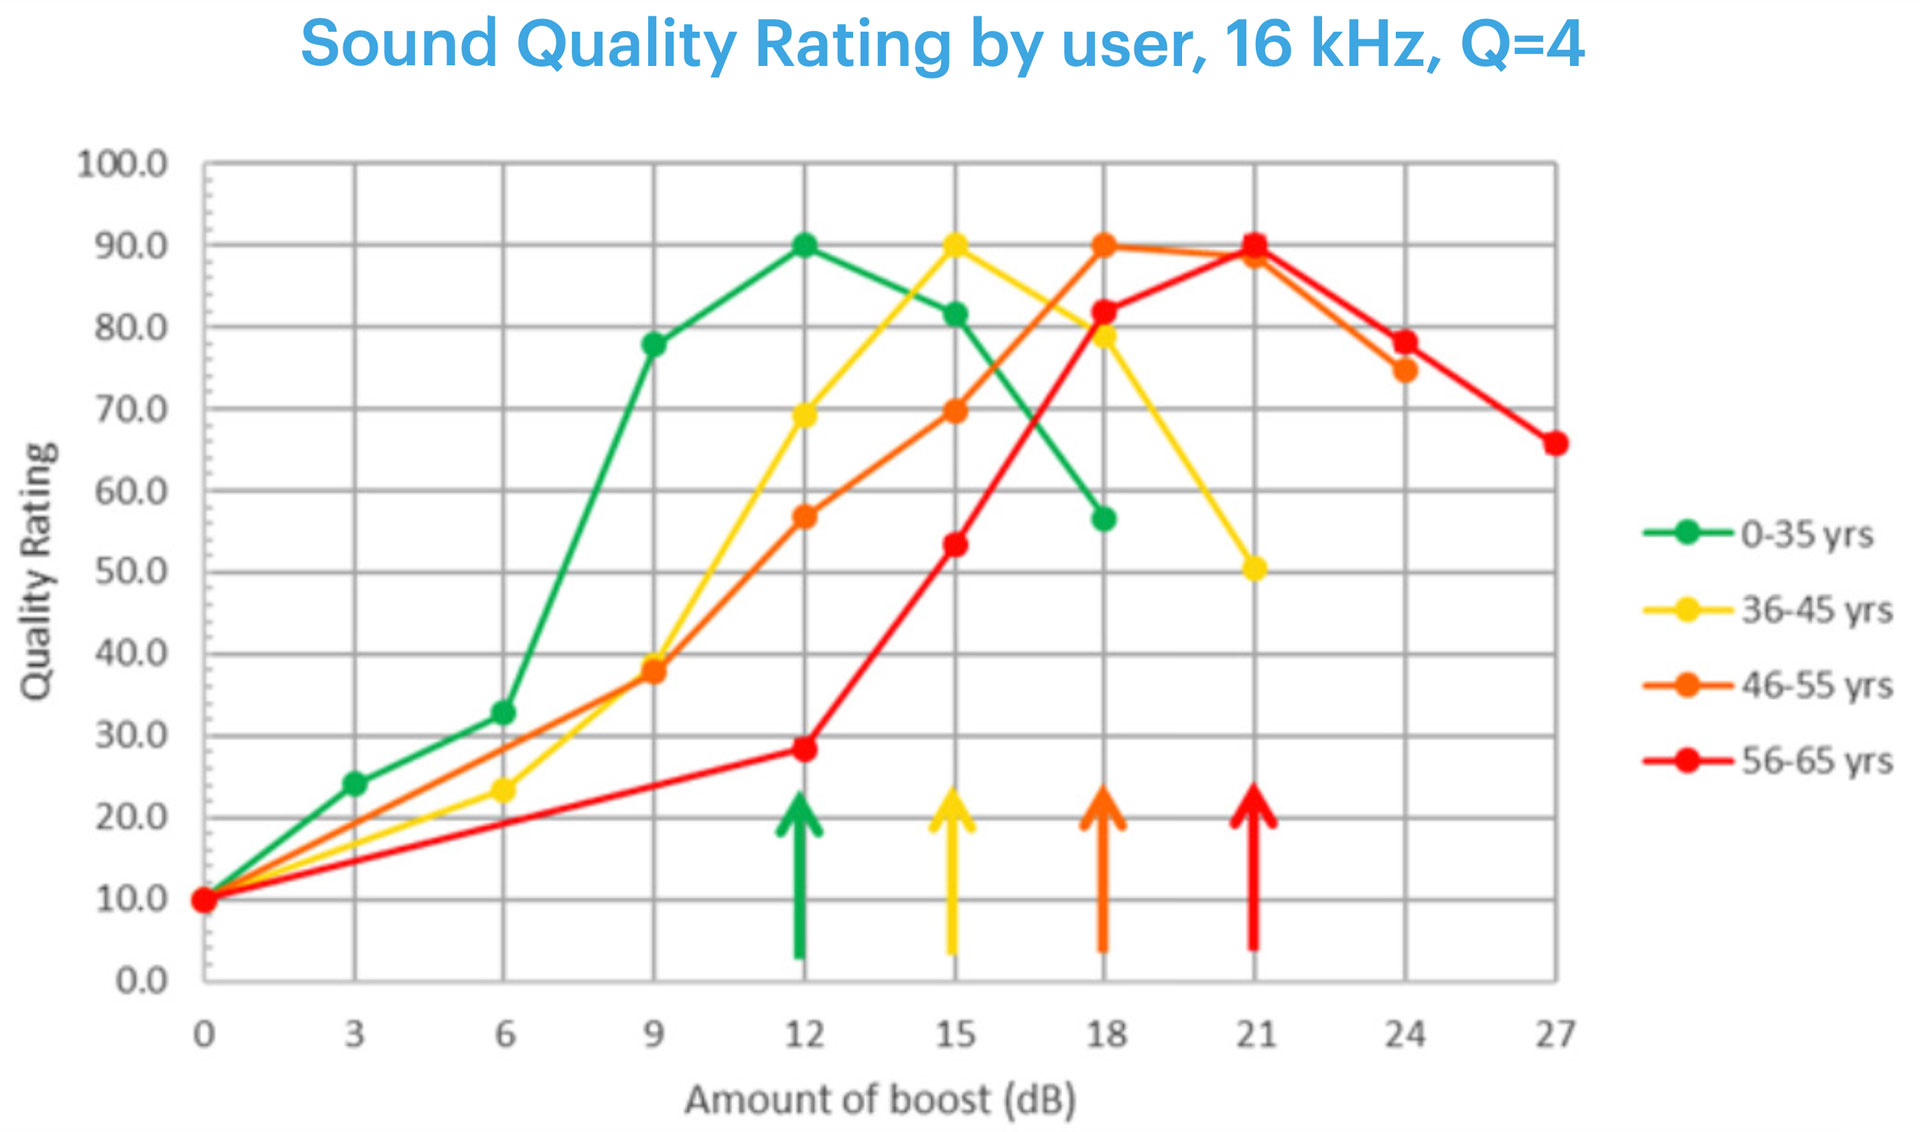 A chart showing that sound quality ratings increase with increased adjustments to the 16KHz notch proposed by Knowles. Older age cohorts require more boosts.